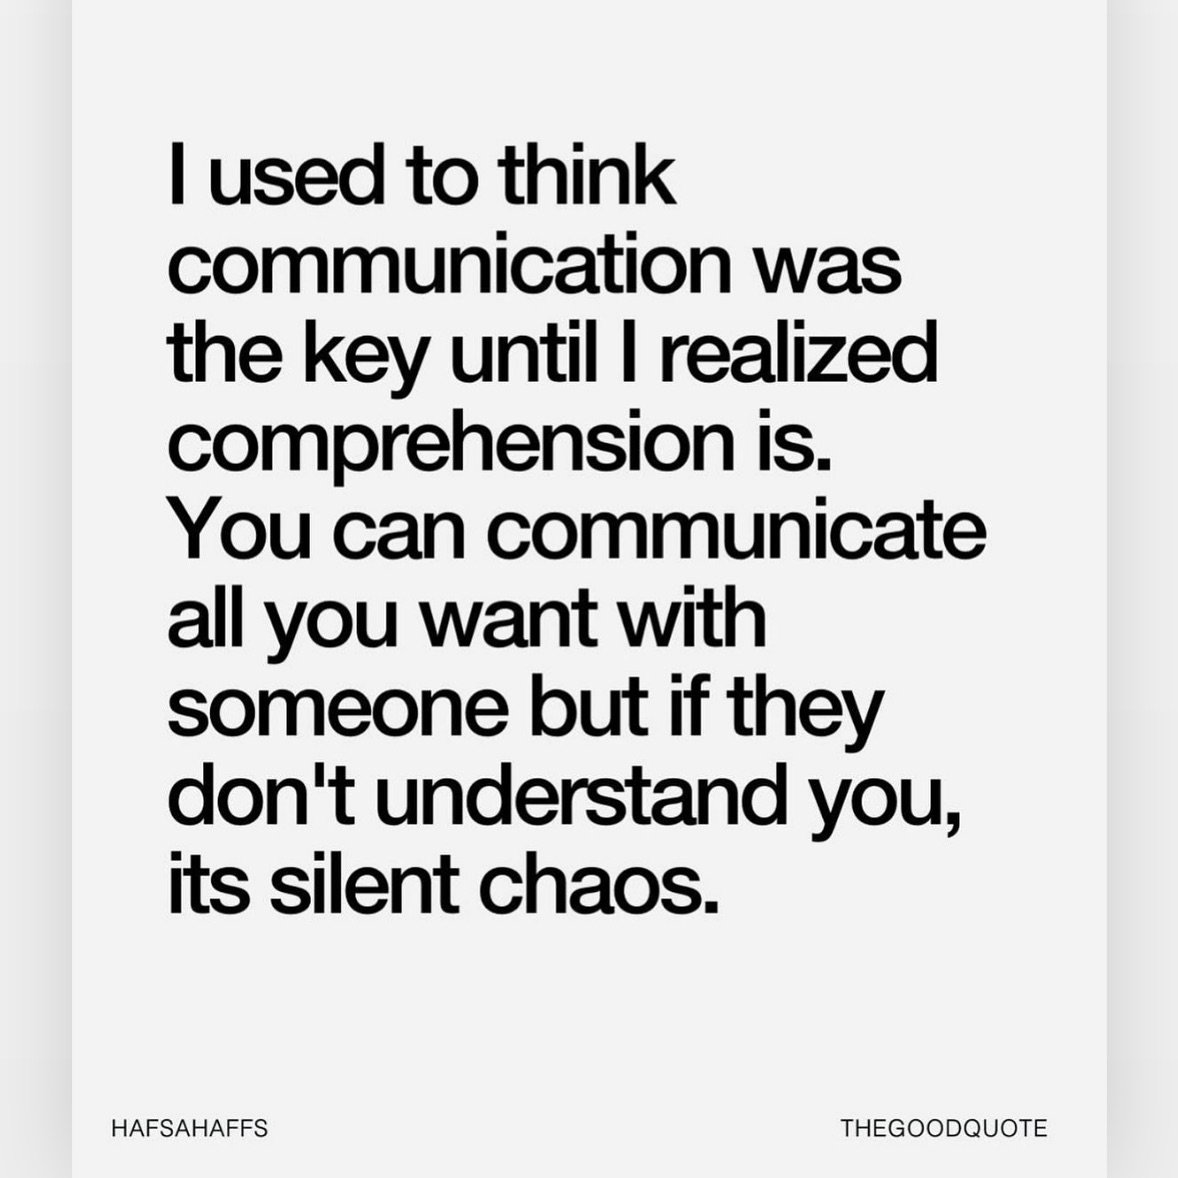 Without communication it can be all chaos

#healthyfood #health